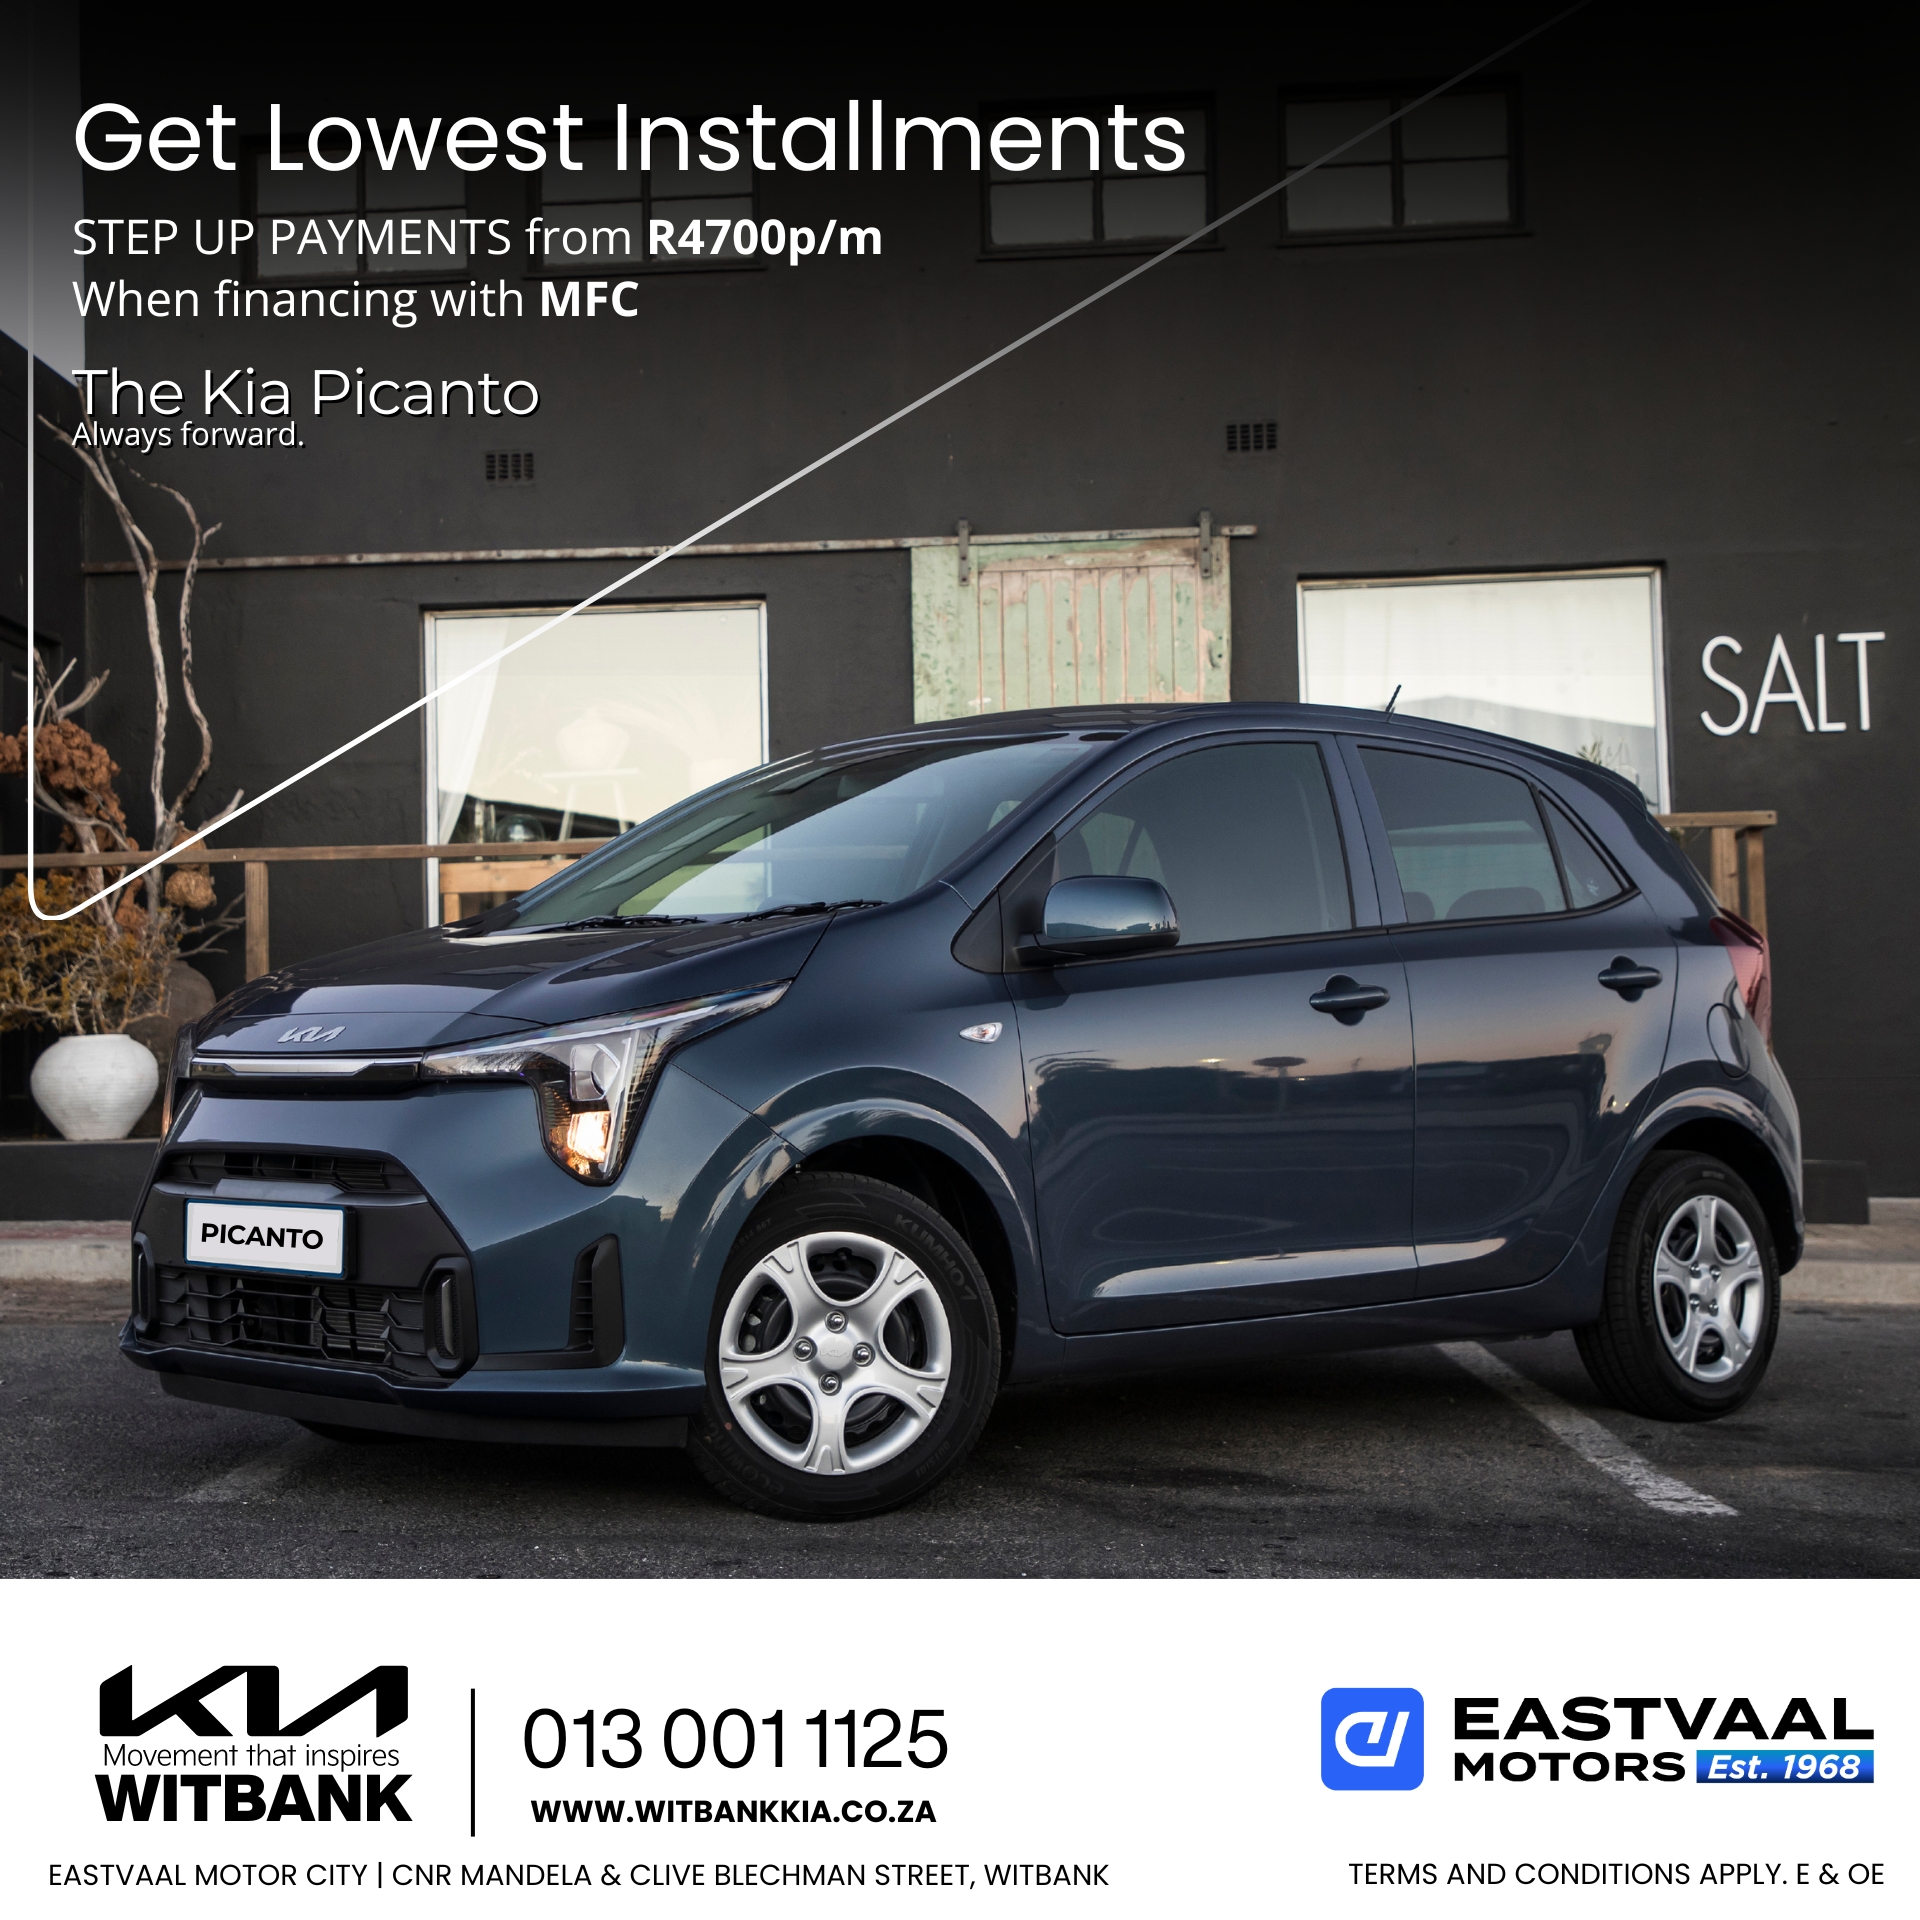 Rev up your summer with a brand-new Kia! Visit Eastvaal Motor City for the best deals. image from 